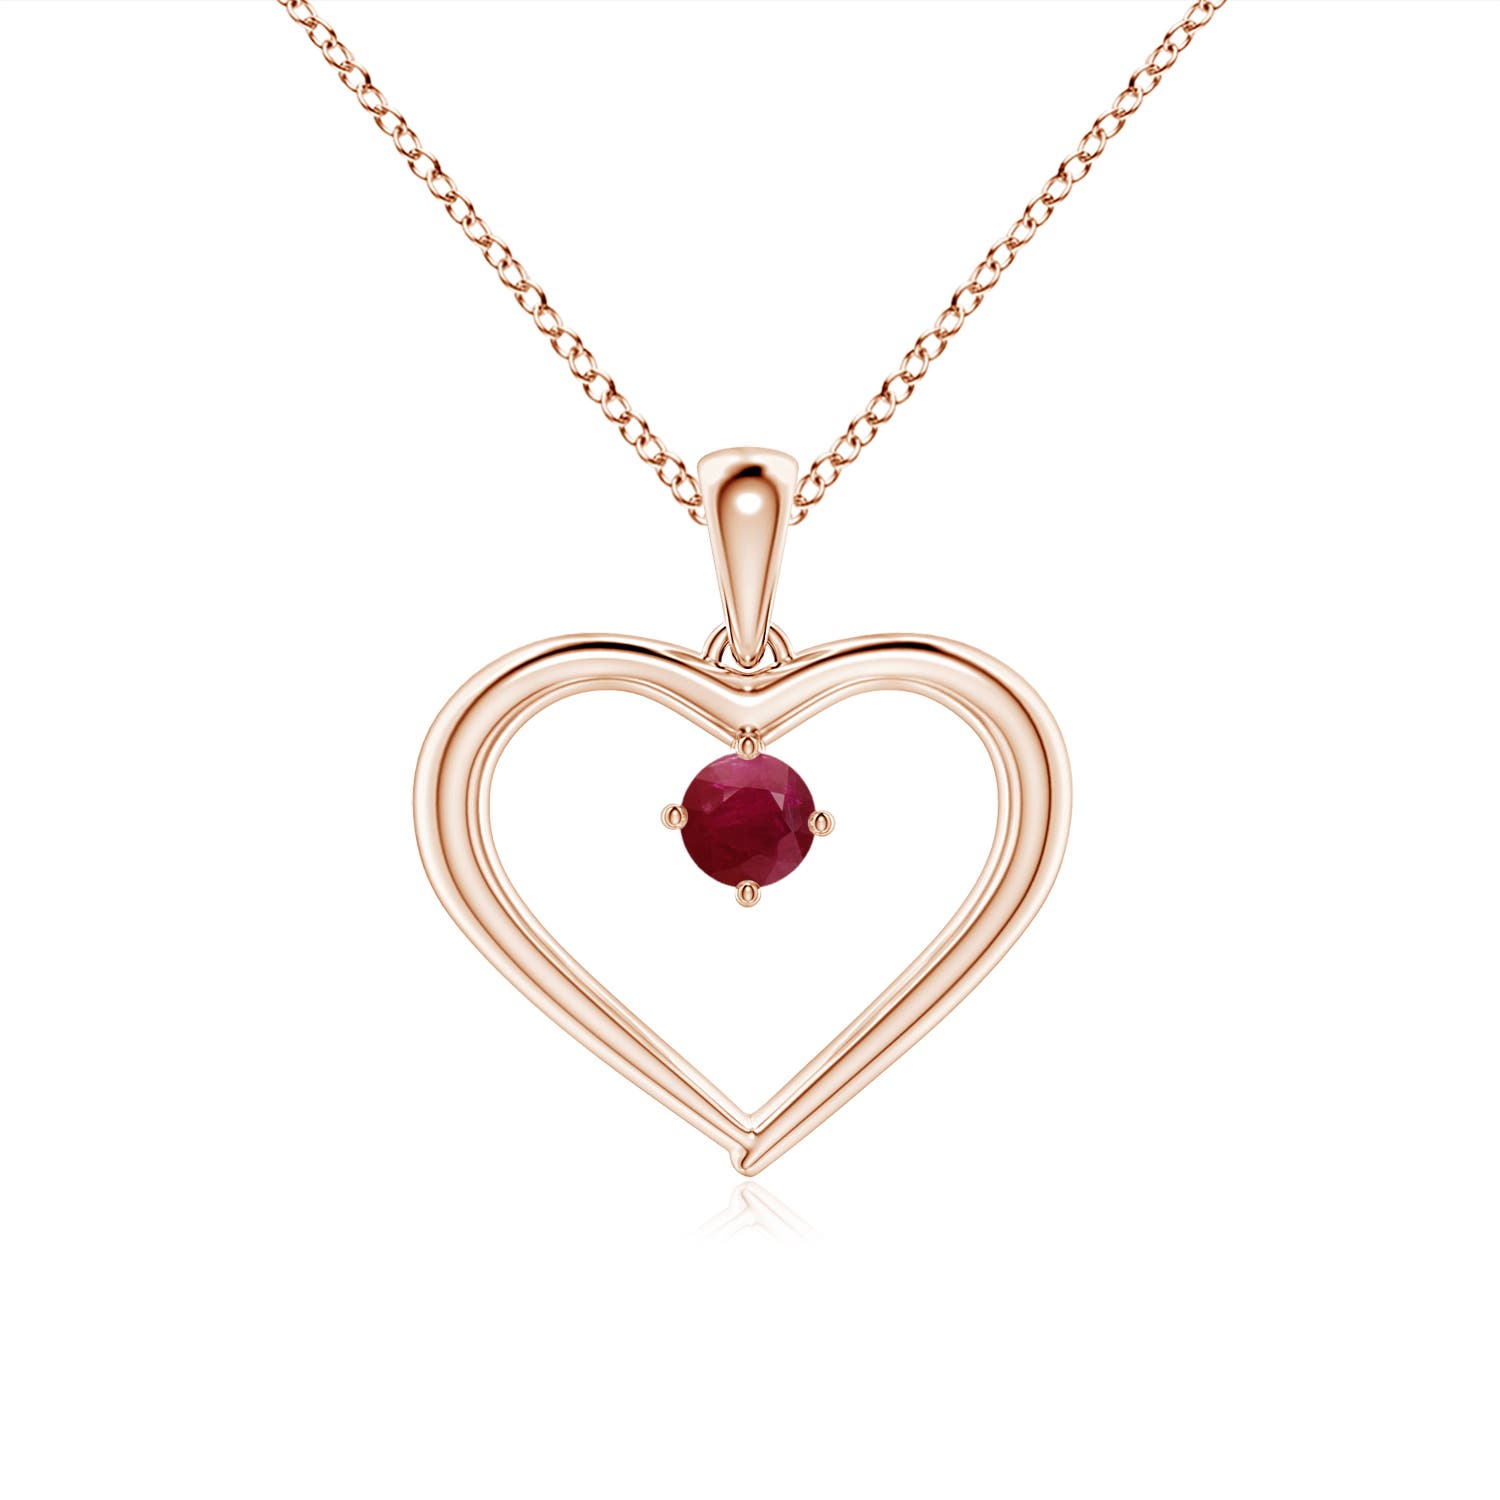 A - Ruby / 0.15 CT / 14 KT Rose Gold